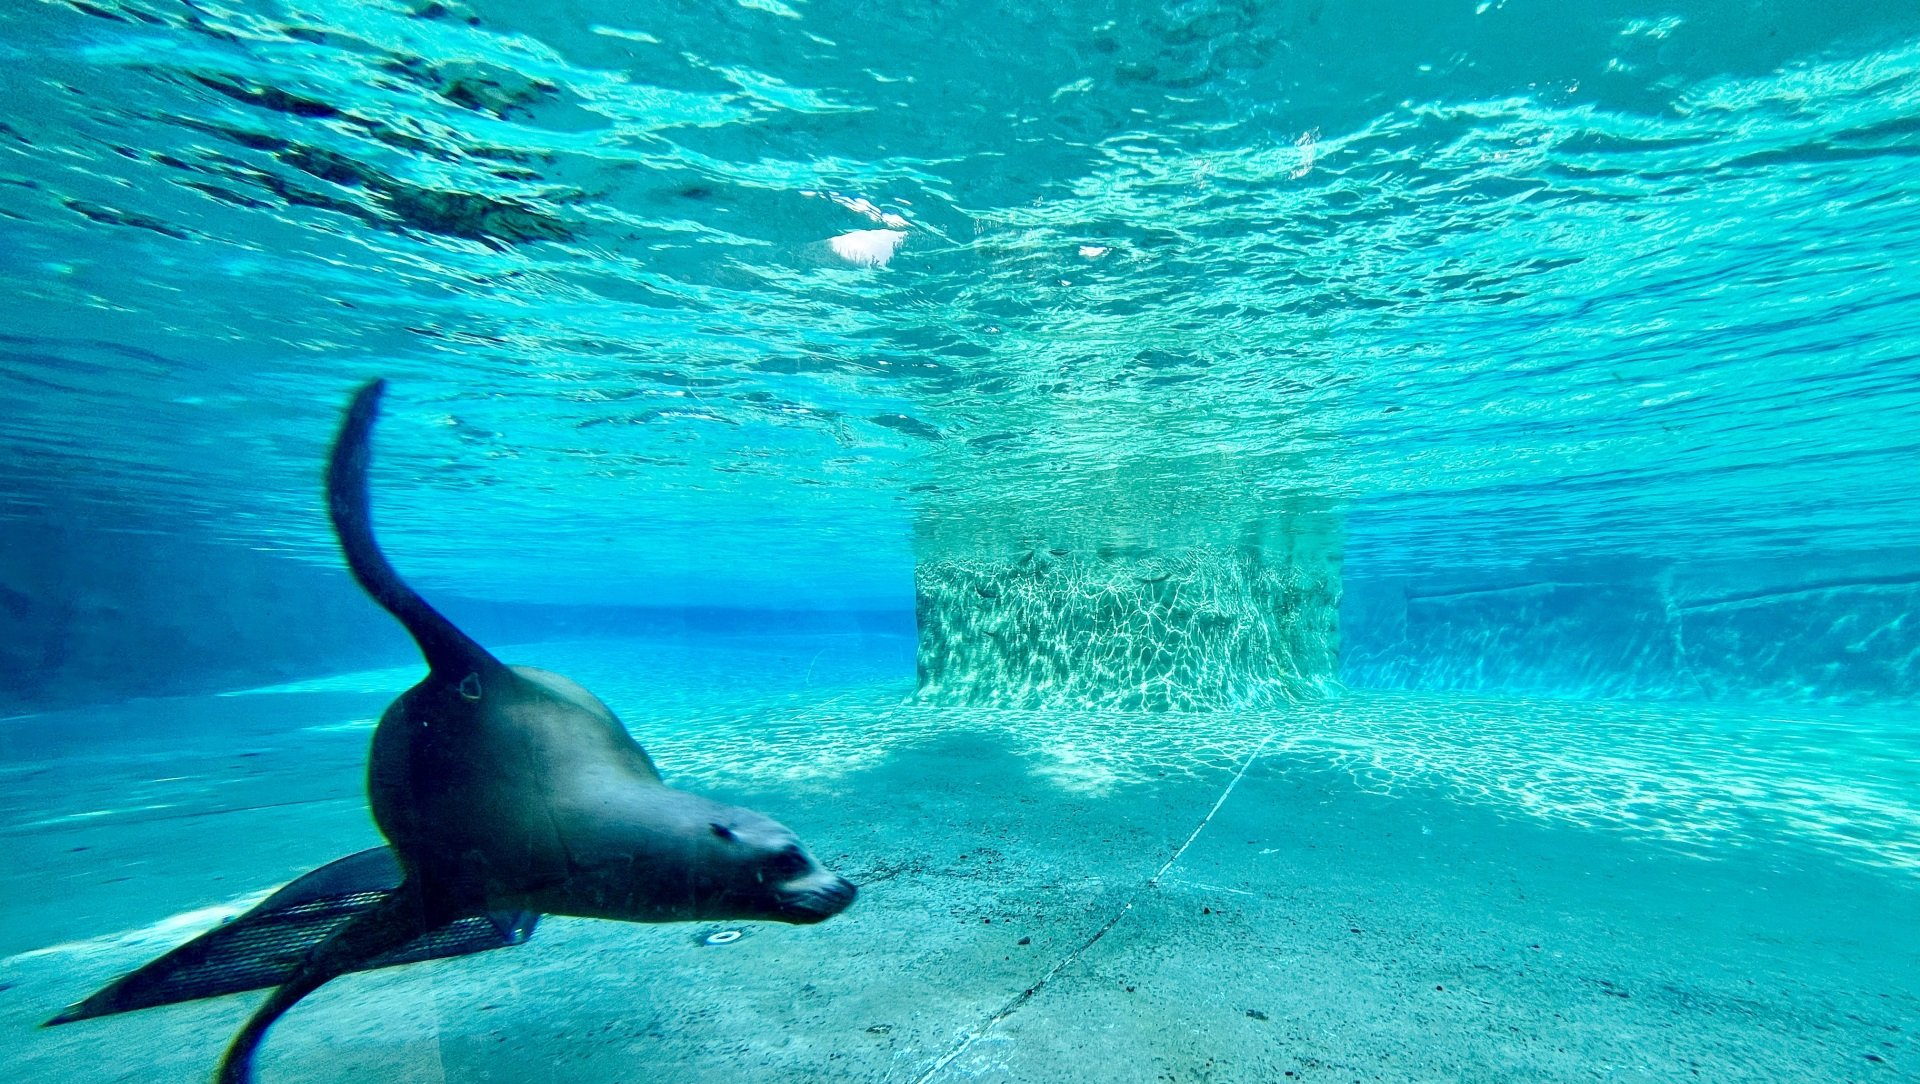 A seal is swimming underwater in a pool.